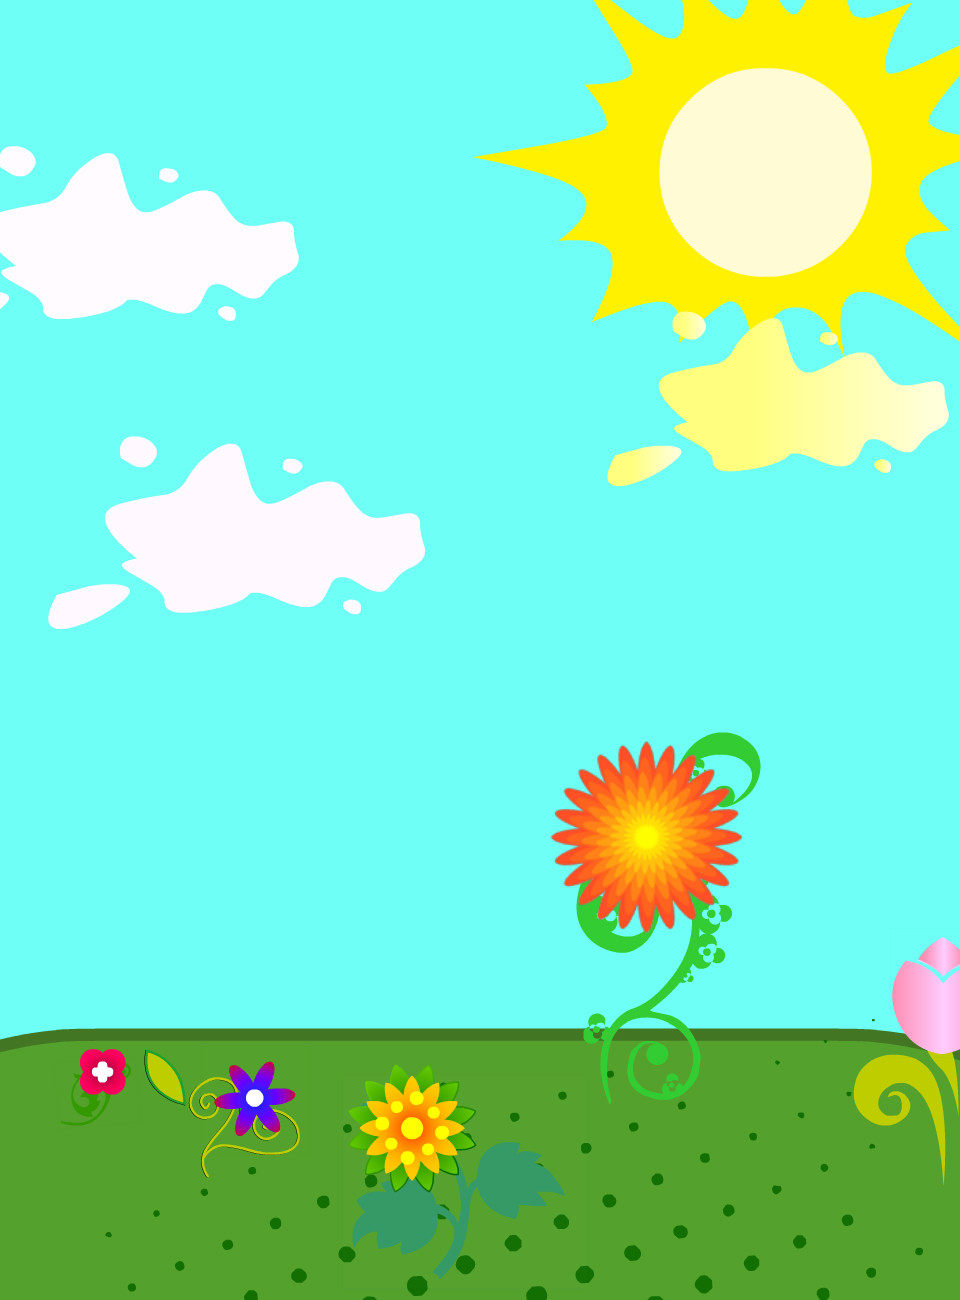 Sunny Day | Publish with Glogster!